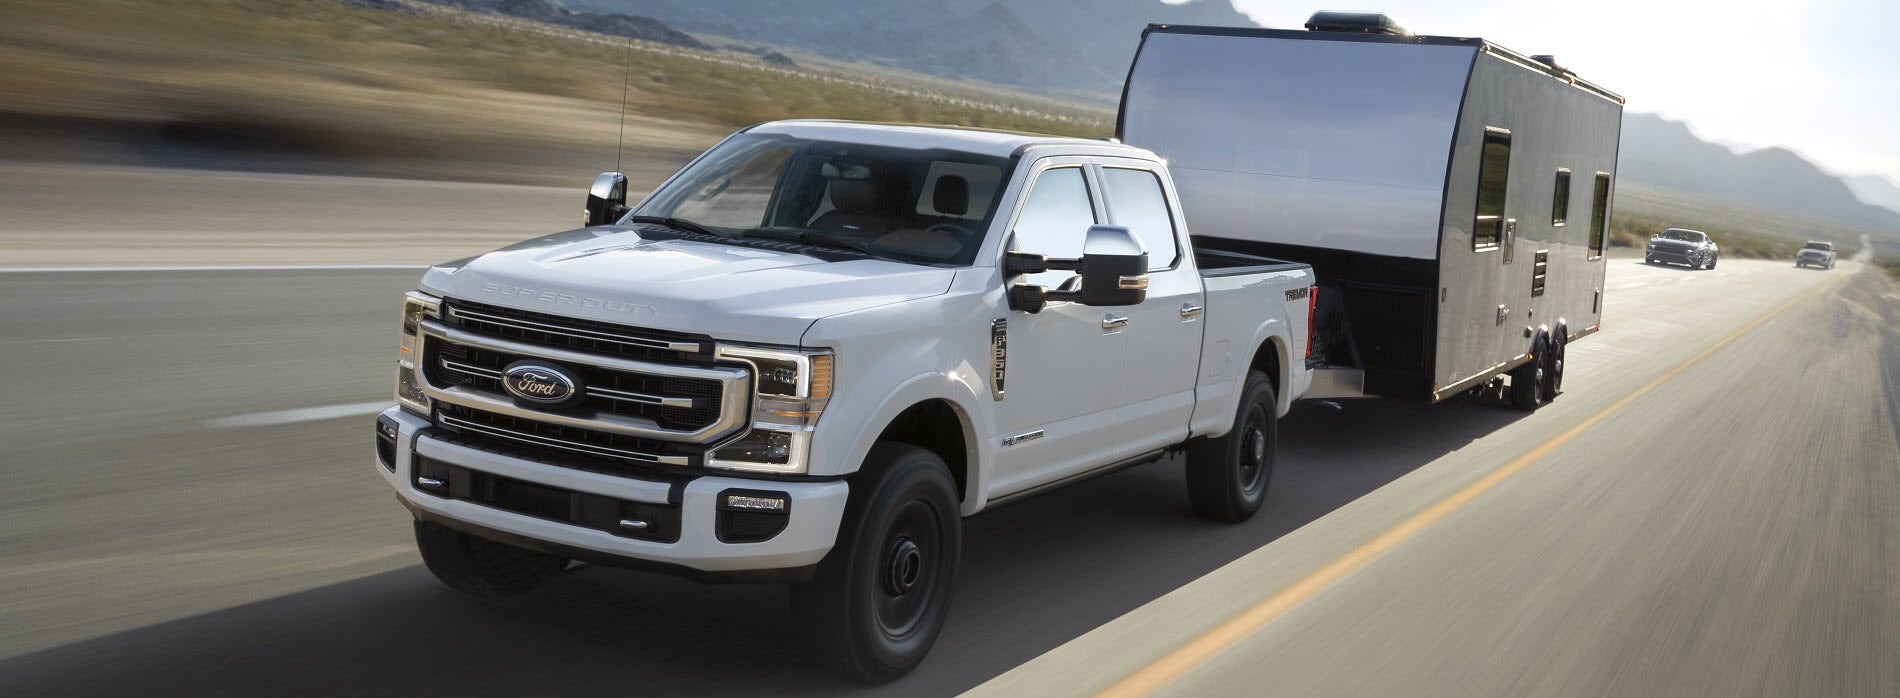 Ford Super Duty F-350 Engine Specs